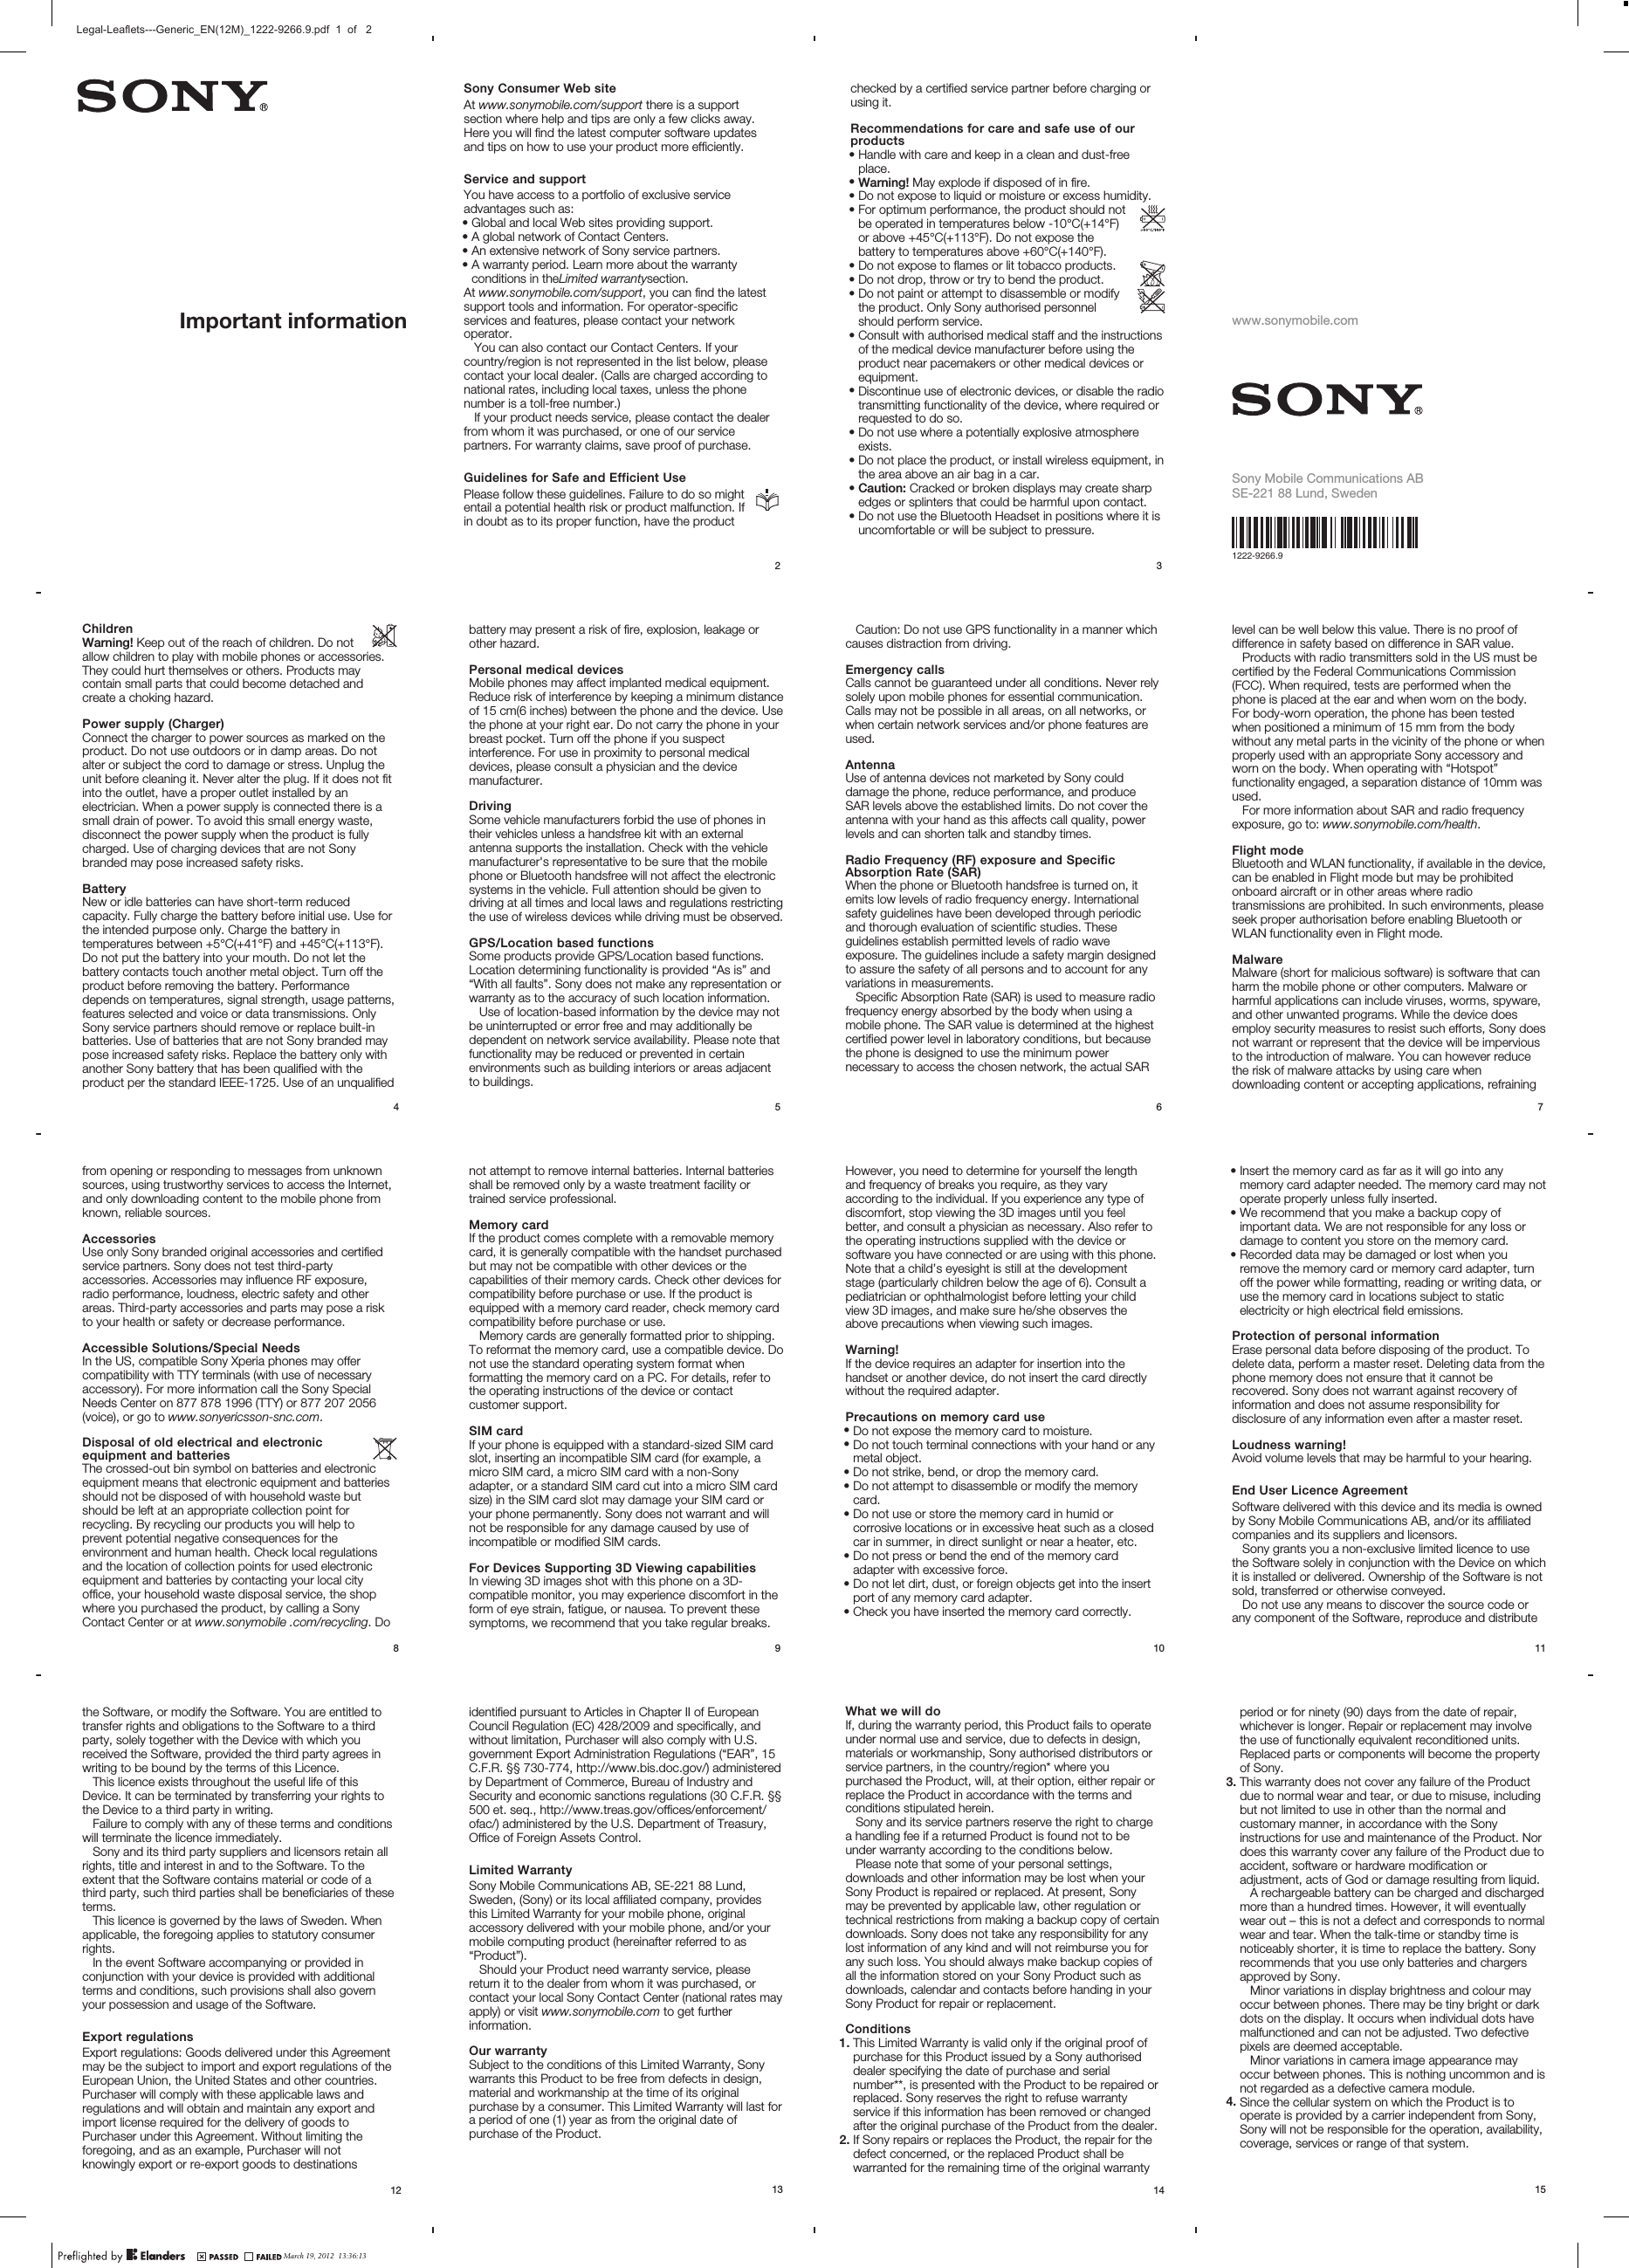 Important informationSony Consumer Web siteAt www.sonymobile.com/support there is a supportsection where help and tips are only a few clicks away.Here you will find the latest computer software updatesand tips on how to use your product more efficiently.Service and supportYou have access to a portfolio of exclusive serviceadvantages such as:•Global and local Web sites providing support.•A global network of Contact Centers.•An extensive network of Sony service partners.•A warranty period. Learn more about the warrantyconditions in theLimited warrantysection.At www.sonymobile.com/support, you can find the latestsupport tools and information. For operator-specificservices and features, please contact your networkoperator.You can also contact our Contact Centers. If yourcountry/region is not represented in the list below, pleasecontact your local dealer. (Calls are charged according tonational rates, including local taxes, unless the phonenumber is a toll-free number.)If your product needs service, please contact the dealerfrom whom it was purchased, or one of our servicepartners. For warranty claims, save proof of purchase.Guidelines for Safe and Efficient UsePlease follow these guidelines. Failure to do so mightentail a potential health risk or product malfunction. Ifin doubt as to its proper function, have the product2 checked by a certified service partner before charging orusing it.Recommendations for care and safe use of ourproducts•Handle with care and keep in a clean and dust-freeplace.•Warning! May explode if disposed of in fire.•Do not expose to liquid or moisture or excess humidity.•For optimum performance, the product should notbe operated in temperatures below -10°C(+14°F)or above +45°C(+113°F). Do not expose thebattery to temperatures above +60°C(+140°F).•Do not expose to flames or lit tobacco products.•Do not drop, throw or try to bend the product.•Do not paint or attempt to disassemble or modifythe product. Only Sony authorised personnelshould perform service.•Consult with authorised medical staff and the instructionsof the medical device manufacturer before using theproduct near pacemakers or other medical devices orequipment.•Discontinue use of electronic devices, or disable the radiotransmitting functionality of the device, where required orrequested to do so.•Do not use where a potentially explosive atmosphereexists.•Do not place the product, or install wireless equipment, inthe area above an air bag in a car.•Caution: Cracked or broken displays may create sharpedges or splinters that could be harmful upon contact.•Do not use the Bluetooth Headset in positions where it isuncomfortable or will be subject to pressure.3 www.sonymobile.comSony Mobile Communications ABSE-221 88 Lund, Sweden1222-9266.9ChildrenWarning! Keep out of the reach of children. Do notallow children to play with mobile phones or accessories.They could hurt themselves or others. Products maycontain small parts that could become detached andcreate a choking hazard.Power supply (Charger)Connect the charger to power sources as marked on theproduct. Do not use outdoors or in damp areas. Do notalter or subject the cord to damage or stress. Unplug theunit before cleaning it. Never alter the plug. If it does not fitinto the outlet, have a proper outlet installed by anelectrician. When a power supply is connected there is asmall drain of power. To avoid this small energy waste,disconnect the power supply when the product is fullycharged. Use of charging devices that are not Sonybranded may pose increased safety risks.BatteryNew or idle batteries can have short-term reducedcapacity. Fully charge the battery before initial use. Use forthe intended purpose only. Charge the battery intemperatures between +5°C(+41°F) and +45°C(+113°F).Do not put the battery into your mouth. Do not let thebattery contacts touch another metal object. Turn off theproduct before removing the battery. Performancedepends on temperatures, signal strength, usage patterns,features selected and voice or data transmissions. OnlySony service partners should remove or replace built-inbatteries. Use of batteries that are not Sony branded maypose increased safety risks. Replace the battery only withanother Sony battery that has been qualified with theproduct per the standard IEEE-1725. Use of an unqualified4 battery may present a risk of fire, explosion, leakage orother hazard.Personal medical devicesMobile phones may affect implanted medical equipment.Reduce risk of interference by keeping a minimum distanceof 15 cm(6 inches) between the phone and the device. Usethe phone at your right ear. Do not carry the phone in yourbreast pocket. Turn off the phone if you suspectinterference. For use in proximity to personal medicaldevices, please consult a physician and the devicemanufacturer.DrivingSome vehicle manufacturers forbid the use of phones intheir vehicles unless a handsfree kit with an externalantenna supports the installation. Check with the vehiclemanufacturer&apos;s representative to be sure that the mobilephone or Bluetooth handsfree will not affect the electronicsystems in the vehicle. Full attention should be given todriving at all times and local laws and regulations restrictingthe use of wireless devices while driving must be observed.GPS/Location based functionsSome products provide GPS/Location based functions.Location determining functionality is provided “As is” and“With all faults”. Sony does not make any representation orwarranty as to the accuracy of such location information.Use of location-based information by the device may notbe uninterrupted or error free and may additionally bedependent on network service availability. Please note thatfunctionality may be reduced or prevented in certainenvironments such as building interiors or areas adjacentto buildings.5 Caution: Do not use GPS functionality in a manner whichcauses distraction from driving.Emergency callsCalls cannot be guaranteed under all conditions. Never relysolely upon mobile phones for essential communication.Calls may not be possible in all areas, on all networks, orwhen certain network services and/or phone features areused.AntennaUse of antenna devices not marketed by Sony coulddamage the phone, reduce performance, and produceSAR levels above the established limits. Do not cover theantenna with your hand as this affects call quality, powerlevels and can shorten talk and standby times.Radio Frequency (RF) exposure and SpecificAbsorption Rate (SAR)When the phone or Bluetooth handsfree is turned on, itemits low levels of radio frequency energy. Internationalsafety guidelines have been developed through periodicand thorough evaluation of scientific studies. Theseguidelines establish permitted levels of radio waveexposure. The guidelines include a safety margin designedto assure the safety of all persons and to account for anyvariations in measurements.Specific Absorption Rate (SAR) is used to measure radiofrequency energy absorbed by the body when using amobile phone. The SAR value is determined at the highestcertified power level in laboratory conditions, but becausethe phone is designed to use the minimum powernecessary to access the chosen network, the actual SAR6 level can be well below this value. There is no proof ofdifference in safety based on difference in SAR value.Products with radio transmitters sold in the US must becertified by the Federal Communications Commission(FCC). When required, tests are performed when thephone is placed at the ear and when worn on the body.For body-worn operation, the phone has been testedwhen positioned a minimum of 15 mm from the bodywithout any metal parts in the vicinity of the phone or whenproperly used with an appropriate Sony accessory andworn on the body. When operating with “Hotspot”functionality engaged, a separation distance of 10mm wasused.For more information about SAR and radio frequencyexposure, go to: www.sonymobile.com/health.Flight modeBluetooth and WLAN functionality, if available in the device,can be enabled in Flight mode but may be prohibitedonboard aircraft or in other areas where radiotransmissions are prohibited. In such environments, pleaseseek proper authorisation before enabling Bluetooth orWLAN functionality even in Flight mode.MalwareMalware (short for malicious software) is software that canharm the mobile phone or other computers. Malware orharmful applications can include viruses, worms, spyware,and other unwanted programs. While the device doesemploy security measures to resist such efforts, Sony doesnot warrant or represent that the device will be imperviousto the introduction of malware. You can however reducethe risk of malware attacks by using care whendownloading content or accepting applications, refraining7 from opening or responding to messages from unknownsources, using trustworthy services to access the Internet,and only downloading content to the mobile phone fromknown, reliable sources.AccessoriesUse only Sony branded original accessories and certifiedservice partners. Sony does not test third-partyaccessories. Accessories may influence RF exposure,radio performance, loudness, electric safety and otherareas. Third-party accessories and parts may pose a riskto your health or safety or decrease performance.Accessible Solutions/Special NeedsIn the US, compatible Sony Xperia phones may offercompatibility with TTY terminals (with use of necessaryaccessory). For more information call the Sony SpecialNeeds Center on 877 878 1996 (TTY) or 877 207 2056(voice), or go to www.sonyericsson-snc.com.Disposal of old electrical and electronicequipment and batteriesThe crossed-out bin symbol on batteries and electronicequipment means that electronic equipment and batteriesshould not be disposed of with household waste butshould be left at an appropriate collection point forrecycling. By recycling our products you will help toprevent potential negative consequences for theenvironment and human health. Check local regulationsand the location of collection points for used electronicequipment and batteries by contacting your local cityoffice, your household waste disposal service, the shopwhere you purchased the product, by calling a SonyContact Center or at www.sonymobile .com/recycling. Do8 not attempt to remove internal batteries. Internal batteriesshall be removed only by a waste treatment facility ortrained service professional.Memory cardIf the product comes complete with a removable memorycard, it is generally compatible with the handset purchasedbut may not be compatible with other devices or thecapabilities of their memory cards. Check other devices forcompatibility before purchase or use. If the product isequipped with a memory card reader, check memory cardcompatibility before purchase or use.Memory cards are generally formatted prior to shipping.To reformat the memory card, use a compatible device. Donot use the standard operating system format whenformatting the memory card on a PC. For details, refer tothe operating instructions of the device or contactcustomer support.SIM cardIf your phone is equipped with a standard-sized SIM cardslot, inserting an incompatible SIM card (for example, amicro SIM card, a micro SIM card with a non-Sonyadapter, or a standard SIM card cut into a micro SIM cardsize) in the SIM card slot may damage your SIM card oryour phone permanently. Sony does not warrant and willnot be responsible for any damage caused by use ofincompatible or modified SIM cards.For Devices Supporting 3D Viewing capabilitiesIn viewing 3D images shot with this phone on a 3D-compatible monitor, you may experience discomfort in theform of eye strain, fatigue, or nausea. To prevent thesesymptoms, we recommend that you take regular breaks.9 However, you need to determine for yourself the lengthand frequency of breaks you require, as they varyaccording to the individual. If you experience any type ofdiscomfort, stop viewing the 3D images until you feelbetter, and consult a physician as necessary. Also refer tothe operating instructions supplied with the device orsoftware you have connected or are using with this phone.Note that a child’s eyesight is still at the developmentstage (particularly children below the age of 6). Consult apediatrician or ophthalmologist before letting your childview 3D images, and make sure he/she observes theabove precautions when viewing such images.Warning!If the device requires an adapter for insertion into thehandset or another device, do not insert the card directlywithout the required adapter.Precautions on memory card use•Do not expose the memory card to moisture.•Do not touch terminal connections with your hand or anymetal object.•Do not strike, bend, or drop the memory card.•Do not attempt to disassemble or modify the memorycard.•Do not use or store the memory card in humid orcorrosive locations or in excessive heat such as a closedcar in summer, in direct sunlight or near a heater, etc.•Do not press or bend the end of the memory cardadapter with excessive force.•Do not let dirt, dust, or foreign objects get into the insertport of any memory card adapter.•Check you have inserted the memory card correctly.10 •Insert the memory card as far as it will go into anymemory card adapter needed. The memory card may notoperate properly unless fully inserted.•We recommend that you make a backup copy ofimportant data. We are not responsible for any loss ordamage to content you store on the memory card.•Recorded data may be damaged or lost when youremove the memory card or memory card adapter, turnoff the power while formatting, reading or writing data, oruse the memory card in locations subject to staticelectricity or high electrical field emissions.Protection of personal informationErase personal data before disposing of the product. Todelete data, perform a master reset. Deleting data from thephone memory does not ensure that it cannot berecovered. Sony does not warrant against recovery ofinformation and does not assume responsibility fordisclosure of any information even after a master reset.Loudness warning!Avoid volume levels that may be harmful to your hearing.End User Licence AgreementSoftware delivered with this device and its media is ownedby Sony Mobile Communications AB, and/or its affiliatedcompanies and its suppliers and licensors.Sony grants you a non-exclusive limited licence to usethe Software solely in conjunction with the Device on whichit is installed or delivered. Ownership of the Software is notsold, transferred or otherwise conveyed.Do not use any means to discover the source code orany component of the Software, reproduce and distribute11 the Software, or modify the Software. You are entitled totransfer rights and obligations to the Software to a thirdparty, solely together with the Device with which youreceived the Software, provided the third party agrees inwriting to be bound by the terms of this Licence.This licence exists throughout the useful life of thisDevice. It can be terminated by transferring your rights tothe Device to a third party in writing.Failure to comply with any of these terms and conditionswill terminate the licence immediately.Sony and its third party suppliers and licensors retain allrights, title and interest in and to the Software. To theextent that the Software contains material or code of athird party, such third parties shall be beneficiaries of theseterms.This licence is governed by the laws of Sweden. Whenapplicable, the foregoing applies to statutory consumerrights.In the event Software accompanying or provided inconjunction with your device is provided with additionalterms and conditions, such provisions shall also governyour possession and usage of the Software.Export regulationsExport regulations: Goods delivered under this Agreementmay be the subject to import and export regulations of theEuropean Union, the United States and other countries.Purchaser will comply with these applicable laws andregulations and will obtain and maintain any export andimport license required for the delivery of goods toPurchaser under this Agreement. Without limiting theforegoing, and as an example, Purchaser will notknowingly export or re-export goods to destinations12 identified pursuant to Articles in Chapter II of EuropeanCouncil Regulation (EC) 428/2009 and specifically, andwithout limitation, Purchaser will also comply with U.S.government Export Administration Regulations (“EAR”, 15C.F.R. §§ 730-774, http://www.bis.doc.gov/) administeredby Department of Commerce, Bureau of Industry andSecurity and economic sanctions regulations (30 C.F.R. §§500 et. seq., http://www.treas.gov/offices/enforcement/ofac/) administered by the U.S. Department of Treasury,Office of Foreign Assets Control.Limited WarrantySony Mobile Communications AB, SE-221 88 Lund,Sweden, (Sony) or its local affiliated company, providesthis Limited Warranty for your mobile phone, originalaccessory delivered with your mobile phone, and/or yourmobile computing product (hereinafter referred to as“Product”).Should your Product need warranty service, pleasereturn it to the dealer from whom it was purchased, orcontact your local Sony Contact Center (national rates mayapply) or visit www.sonymobile.com to get furtherinformation.Our warrantySubject to the conditions of this Limited Warranty, Sonywarrants this Product to be free from defects in design,material and workmanship at the time of its originalpurchase by a consumer. This Limited Warranty will last fora period of one (1) year as from the original date ofpurchase of the Product.13 What we will doIf, during the warranty period, this Product fails to operateunder normal use and service, due to defects in design,materials or workmanship, Sony authorised distributors orservice partners, in the country/region* where youpurchased the Product, will, at their option, either repair orreplace the Product in accordance with the terms andconditions stipulated herein.Sony and its service partners reserve the right to chargea handling fee if a returned Product is found not to beunder warranty according to the conditions below.Please note that some of your personal settings,downloads and other information may be lost when yourSony Product is repaired or replaced. At present, Sonymay be prevented by applicable law, other regulation ortechnical restrictions from making a backup copy of certaindownloads. Sony does not take any responsibility for anylost information of any kind and will not reimburse you forany such loss. You should always make backup copies ofall the information stored on your Sony Product such asdownloads, calendar and contacts before handing in yourSony Product for repair or replacement.Conditions1. This Limited Warranty is valid only if the original proof ofpurchase for this Product issued by a Sony authoriseddealer specifying the date of purchase and serialnumber**, is presented with the Product to be repaired orreplaced. Sony reserves the right to refuse warrantyservice if this information has been removed or changedafter the original purchase of the Product from the dealer.2. If Sony repairs or replaces the Product, the repair for thedefect concerned, or the replaced Product shall bewarranted for the remaining time of the original warranty14 period or for ninety (90) days from the date of repair,whichever is longer. Repair or replacement may involvethe use of functionally equivalent reconditioned units.Replaced parts or components will become the propertyof Sony.3. This warranty does not cover any failure of the Productdue to normal wear and tear, or due to misuse, includingbut not limited to use in other than the normal andcustomary manner, in accordance with the Sonyinstructions for use and maintenance of the Product. Nordoes this warranty cover any failure of the Product due toaccident, software or hardware modification oradjustment, acts of God or damage resulting from liquid.A rechargeable battery can be charged and dischargedmore than a hundred times. However, it will eventuallywear out – this is not a defect and corresponds to normalwear and tear. When the talk-time or standby time isnoticeably shorter, it is time to replace the battery. Sonyrecommends that you use only batteries and chargersapproved by Sony.Minor variations in display brightness and colour mayoccur between phones. There may be tiny bright or darkdots on the display. It occurs when individual dots havemalfunctioned and can not be adjusted. Two defectivepixels are deemed acceptable.Minor variations in camera image appearance mayoccur between phones. This is nothing uncommon and isnot regarded as a defective camera module.4. Since the cellular system on which the Product is tooperate is provided by a carrier independent from Sony,Sony will not be responsible for the operation, availability,coverage, services or range of that system.15 March 19, 2012  13:36:13Legal-Leaflets---Generic_EN(12M)_1222-9266.9.pdf  1  of   2